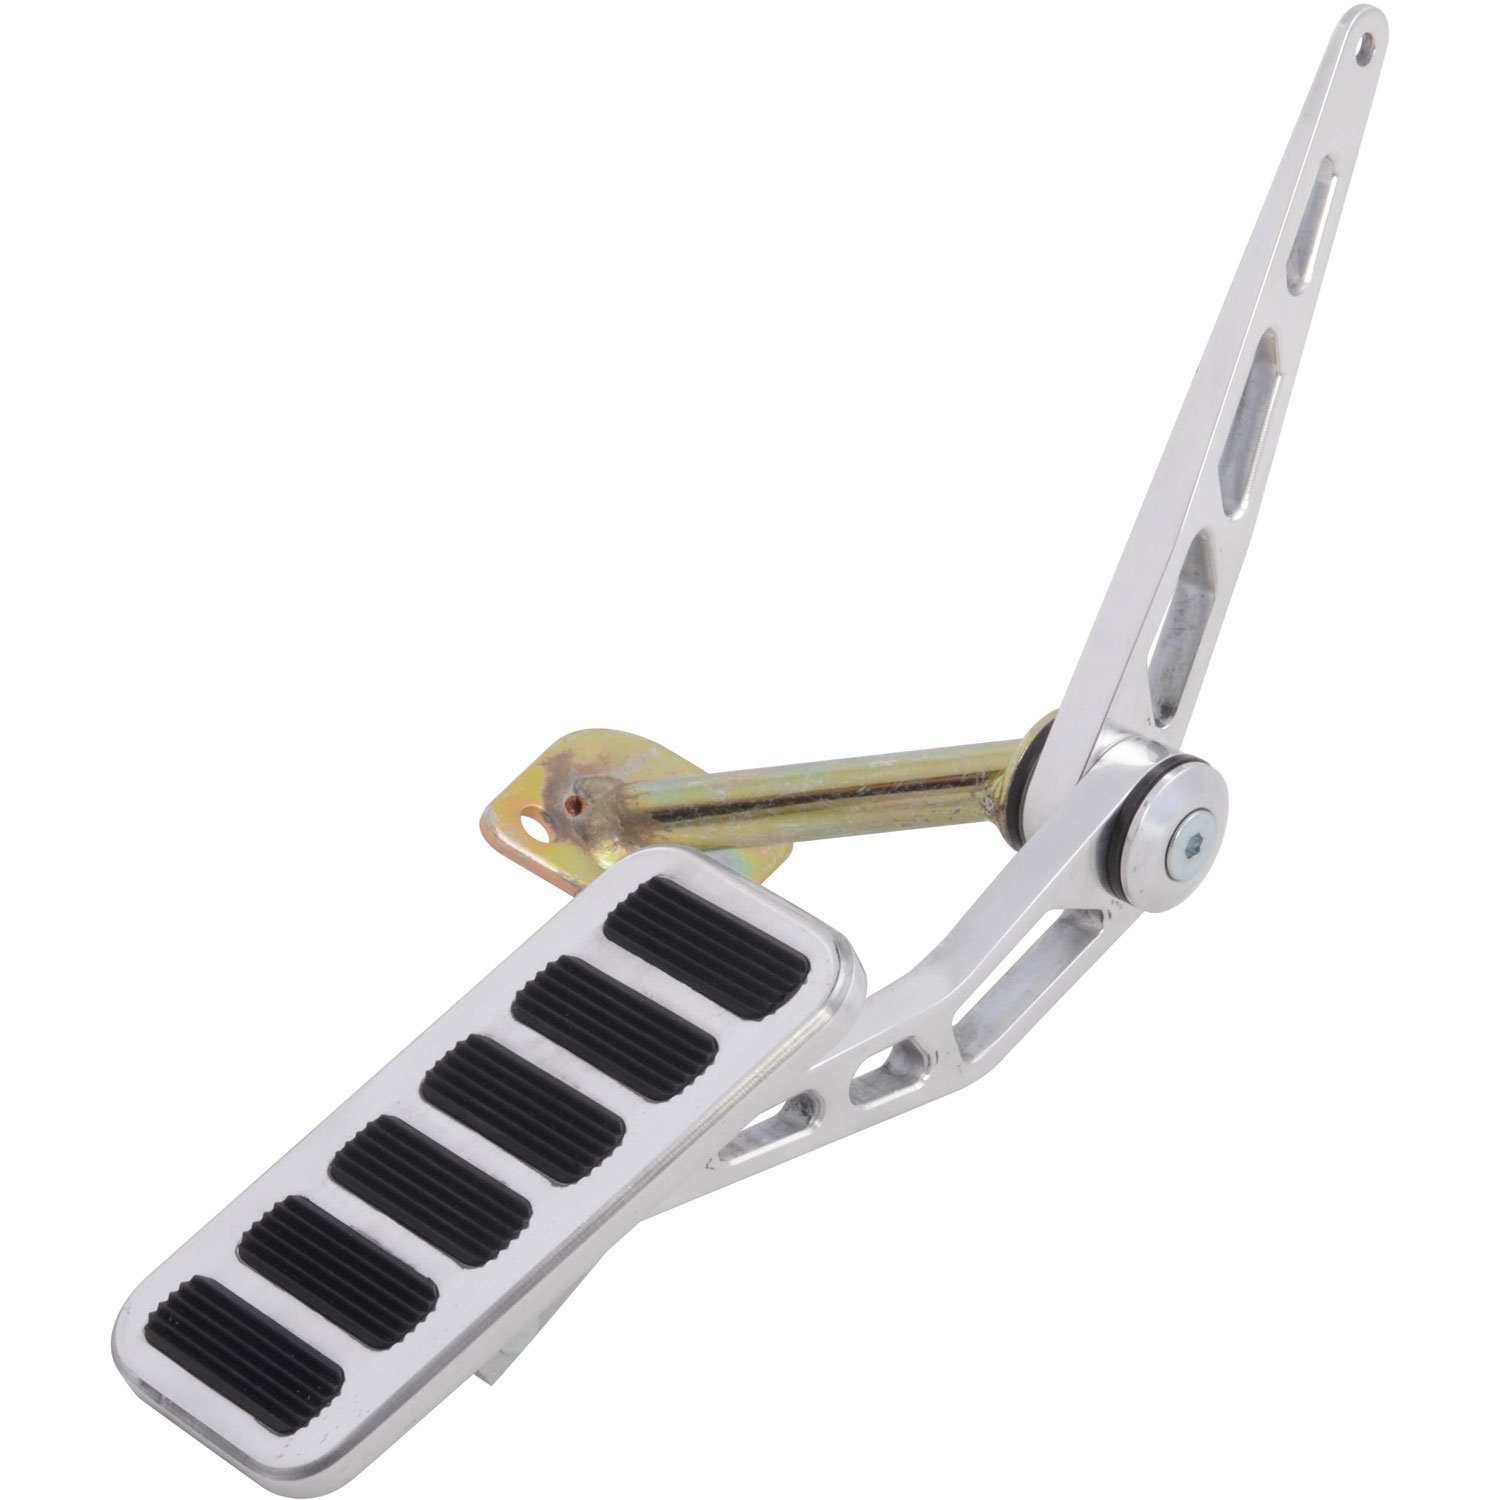 Billet Gas Pedal Assembly for 1955-1957 Chevy [Polished Aluminum]